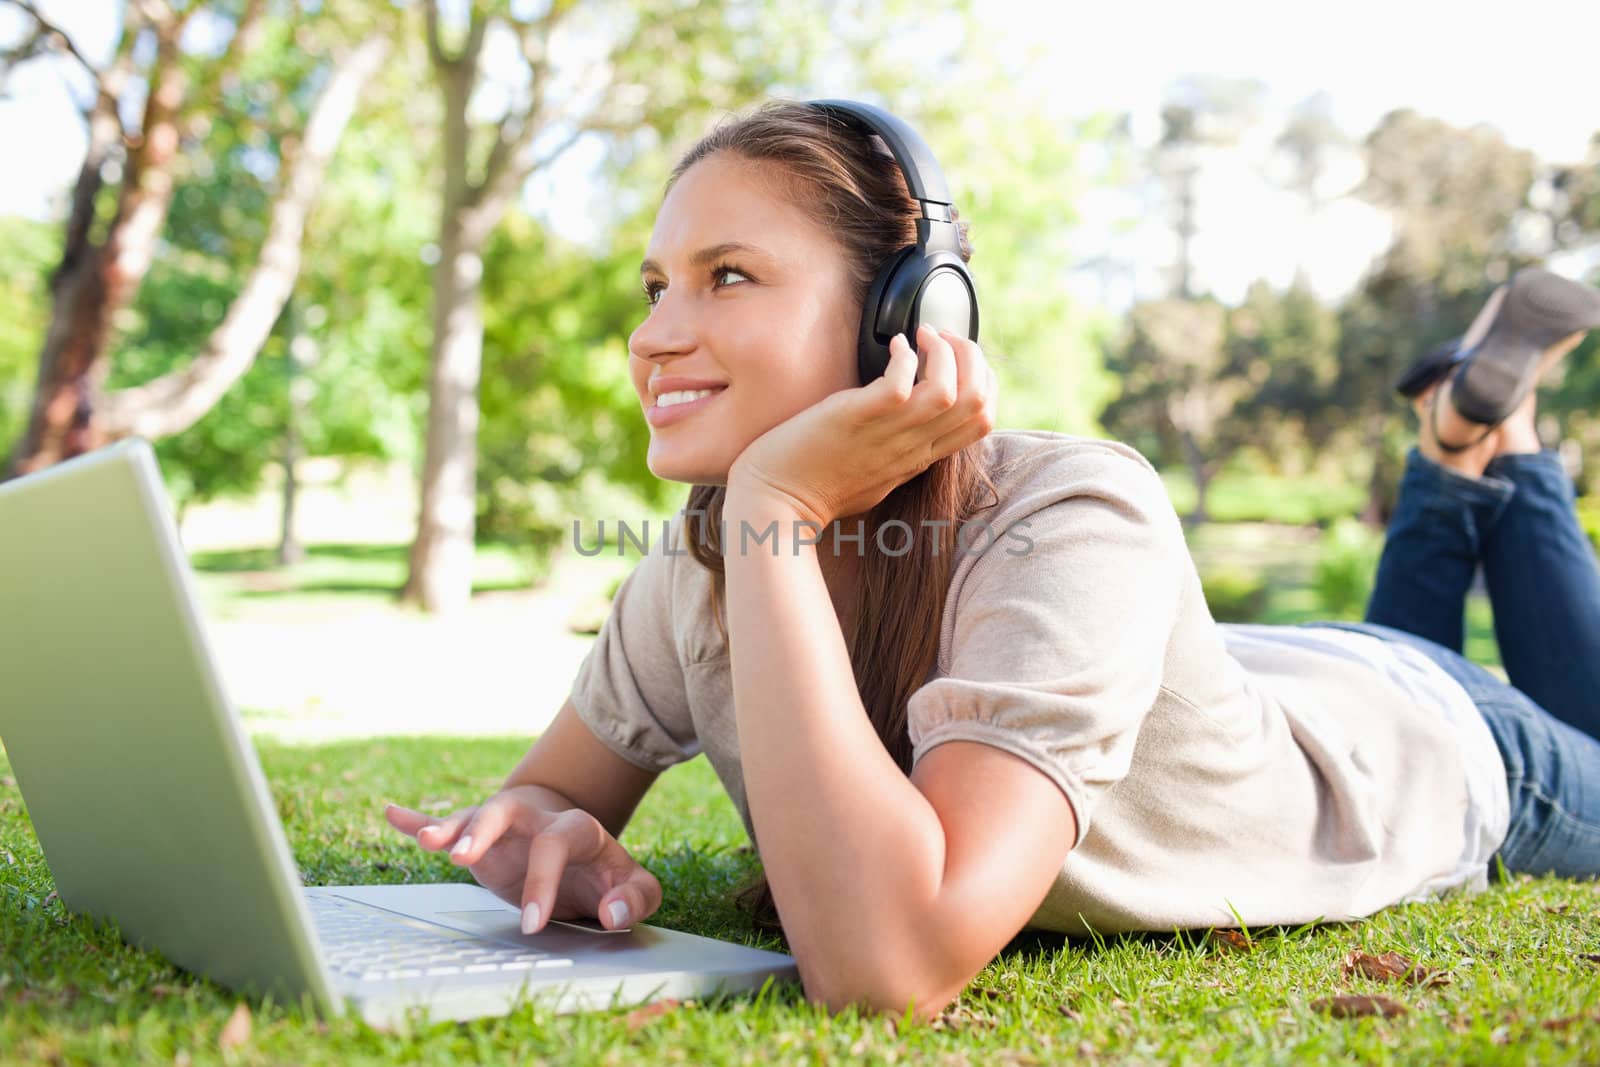 Smiling woman with headphones and a laptop lying on the lawn by Wavebreakmedia